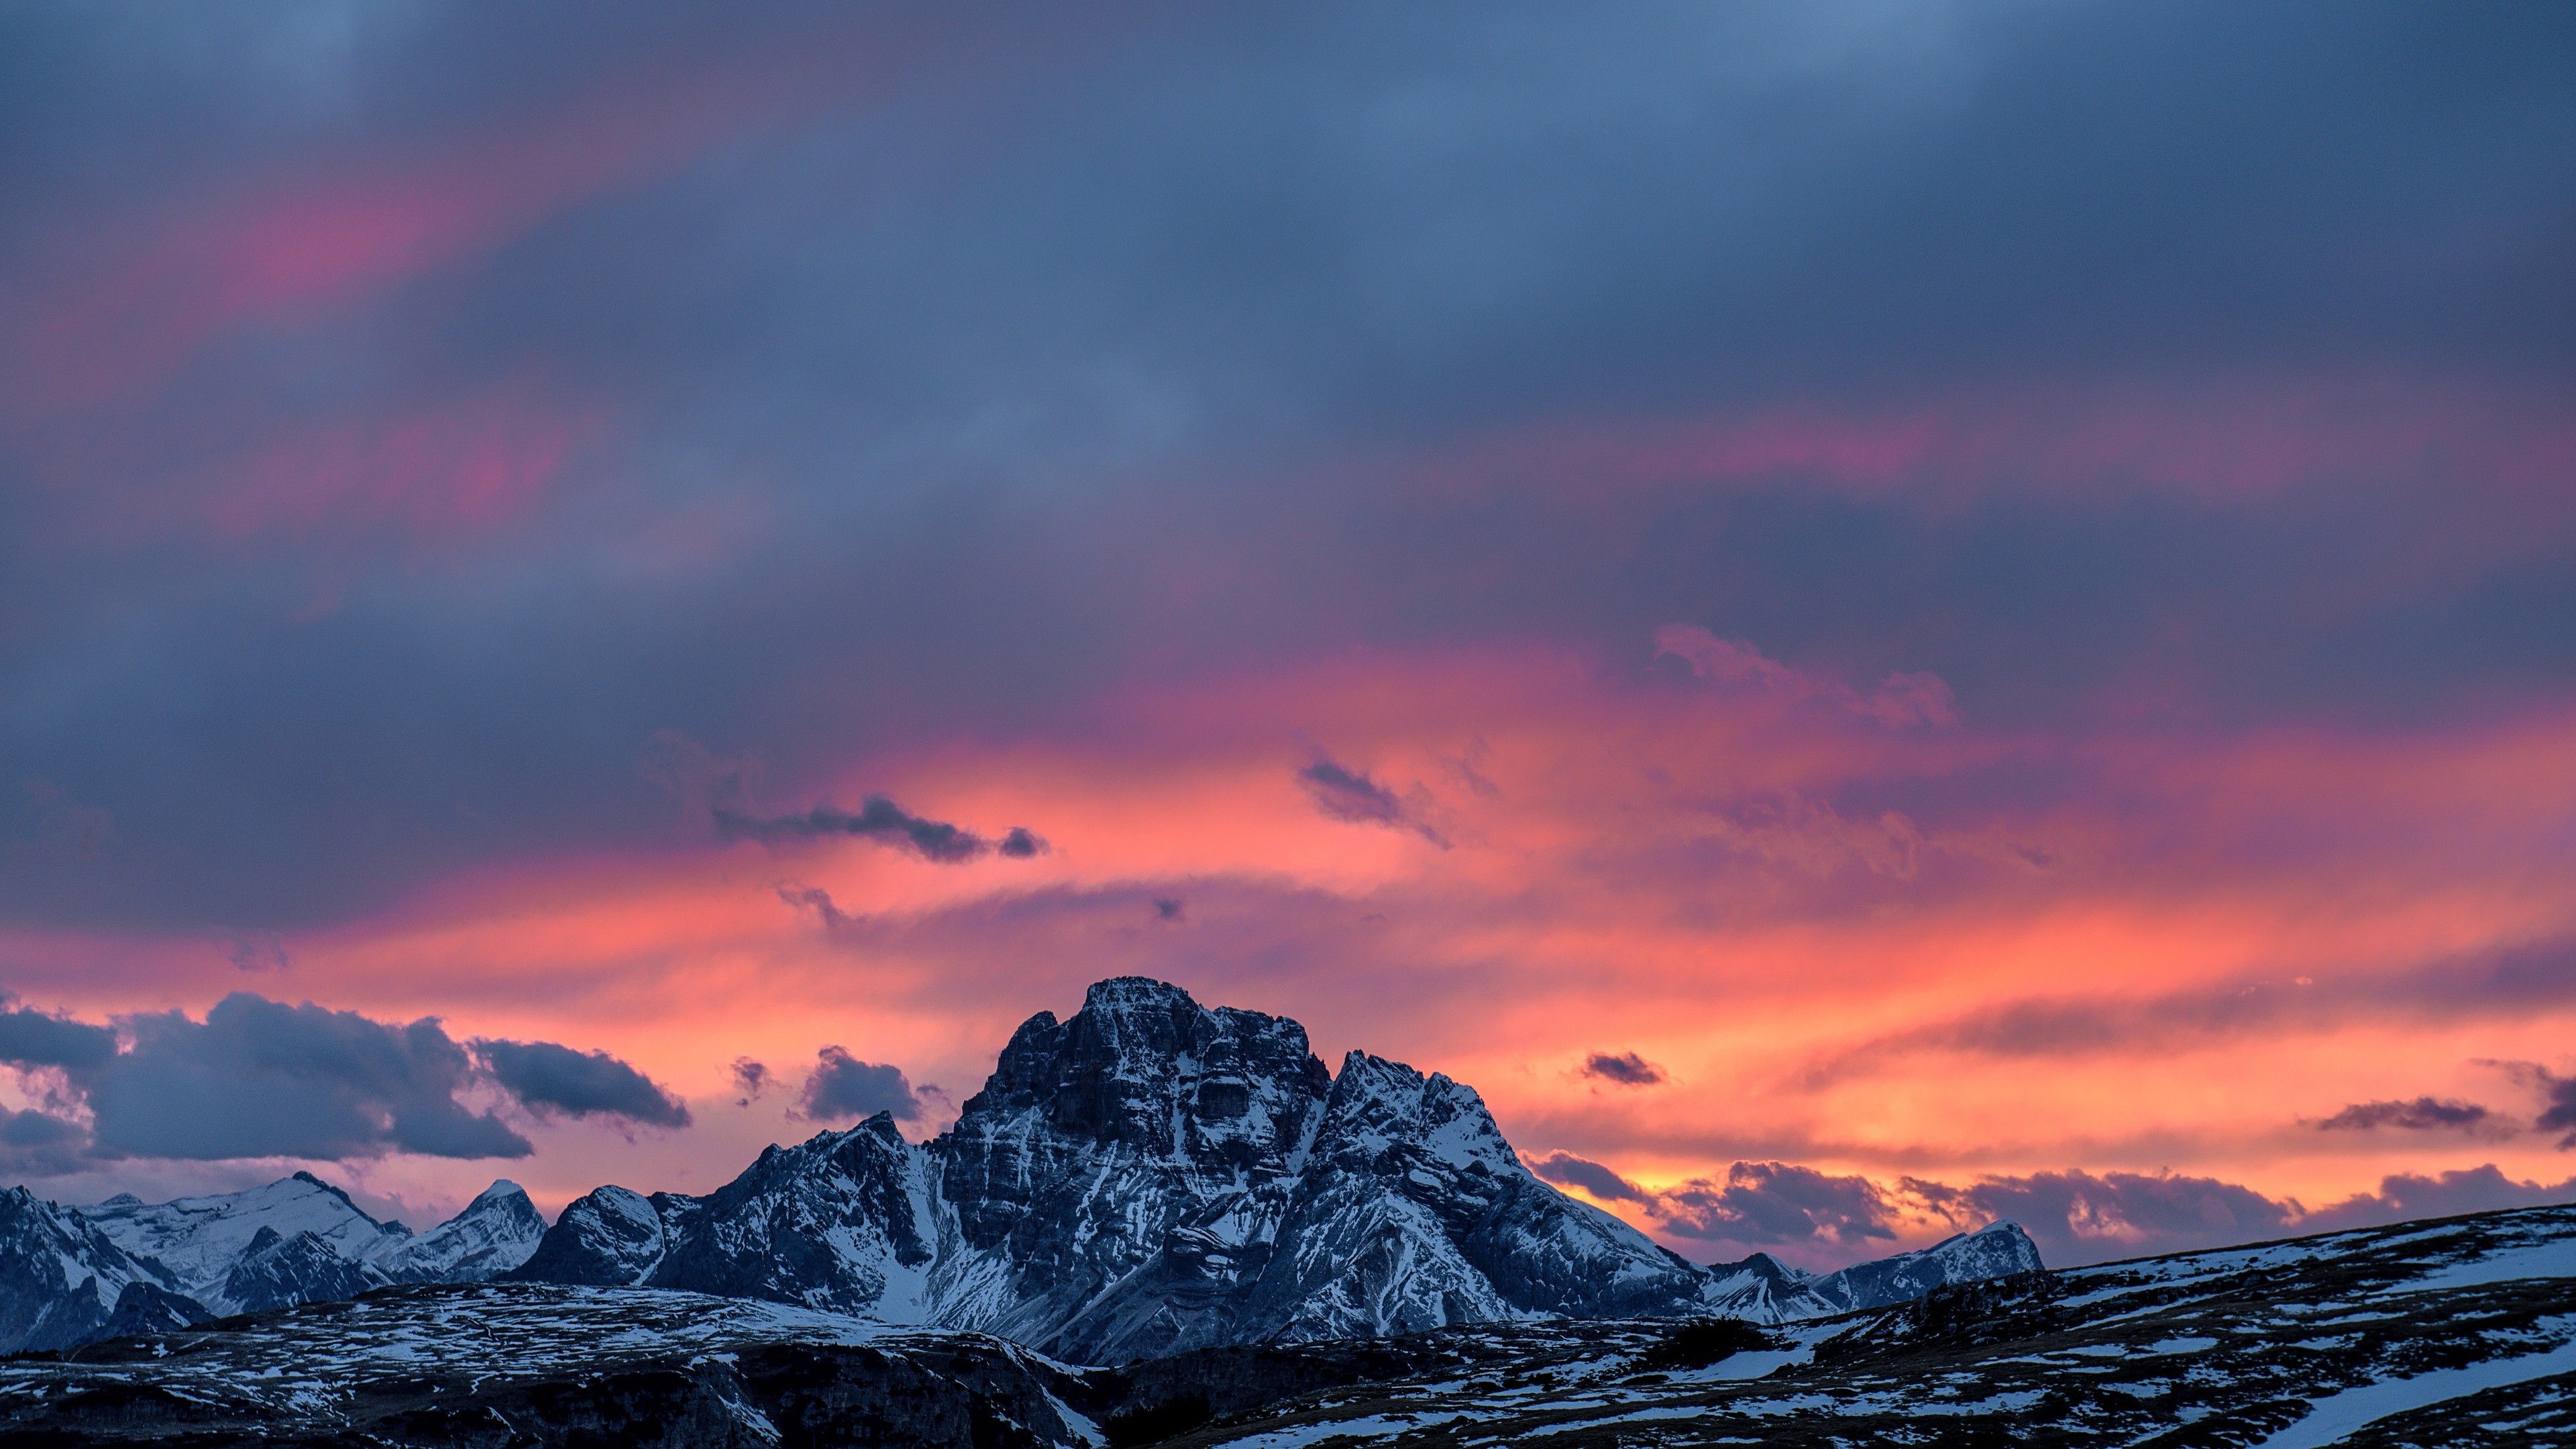 1190000 Mountain Sunset Stock Photos Pictures  RoyaltyFree Images   iStock  Mountain sunrise Mountain Sunset